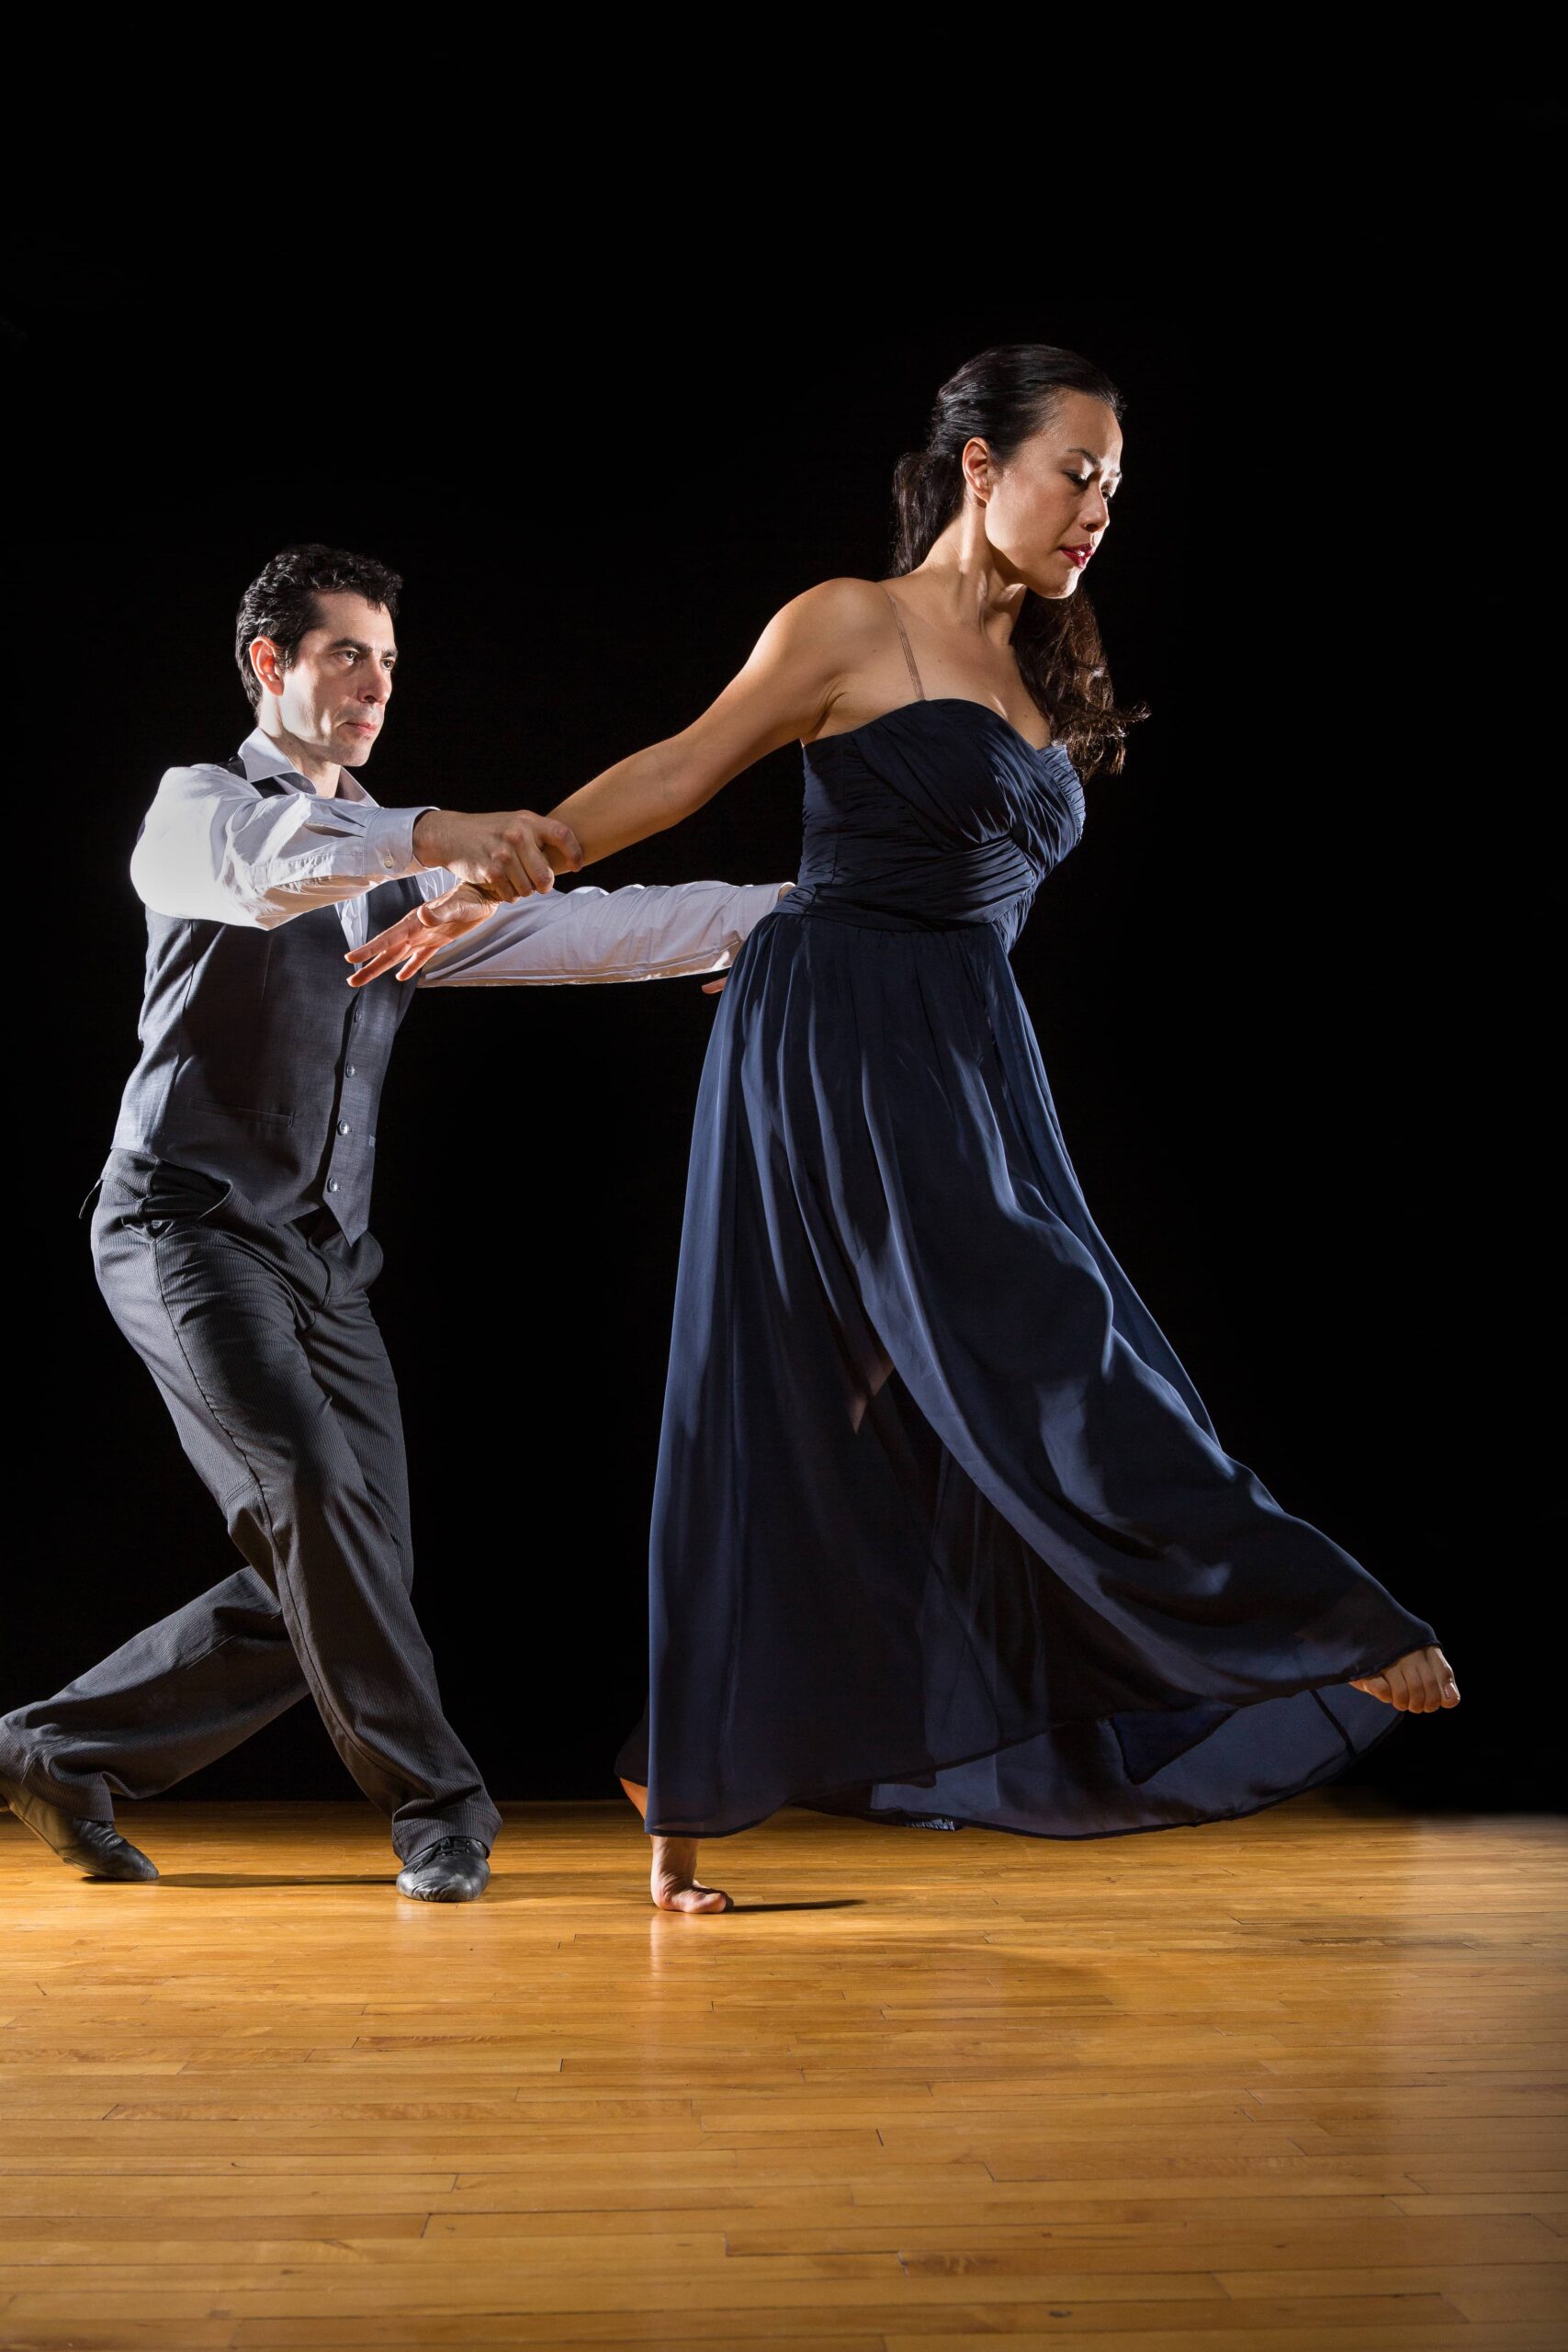 Ballroom Dancing During a Pandemic – CPAPTEAM